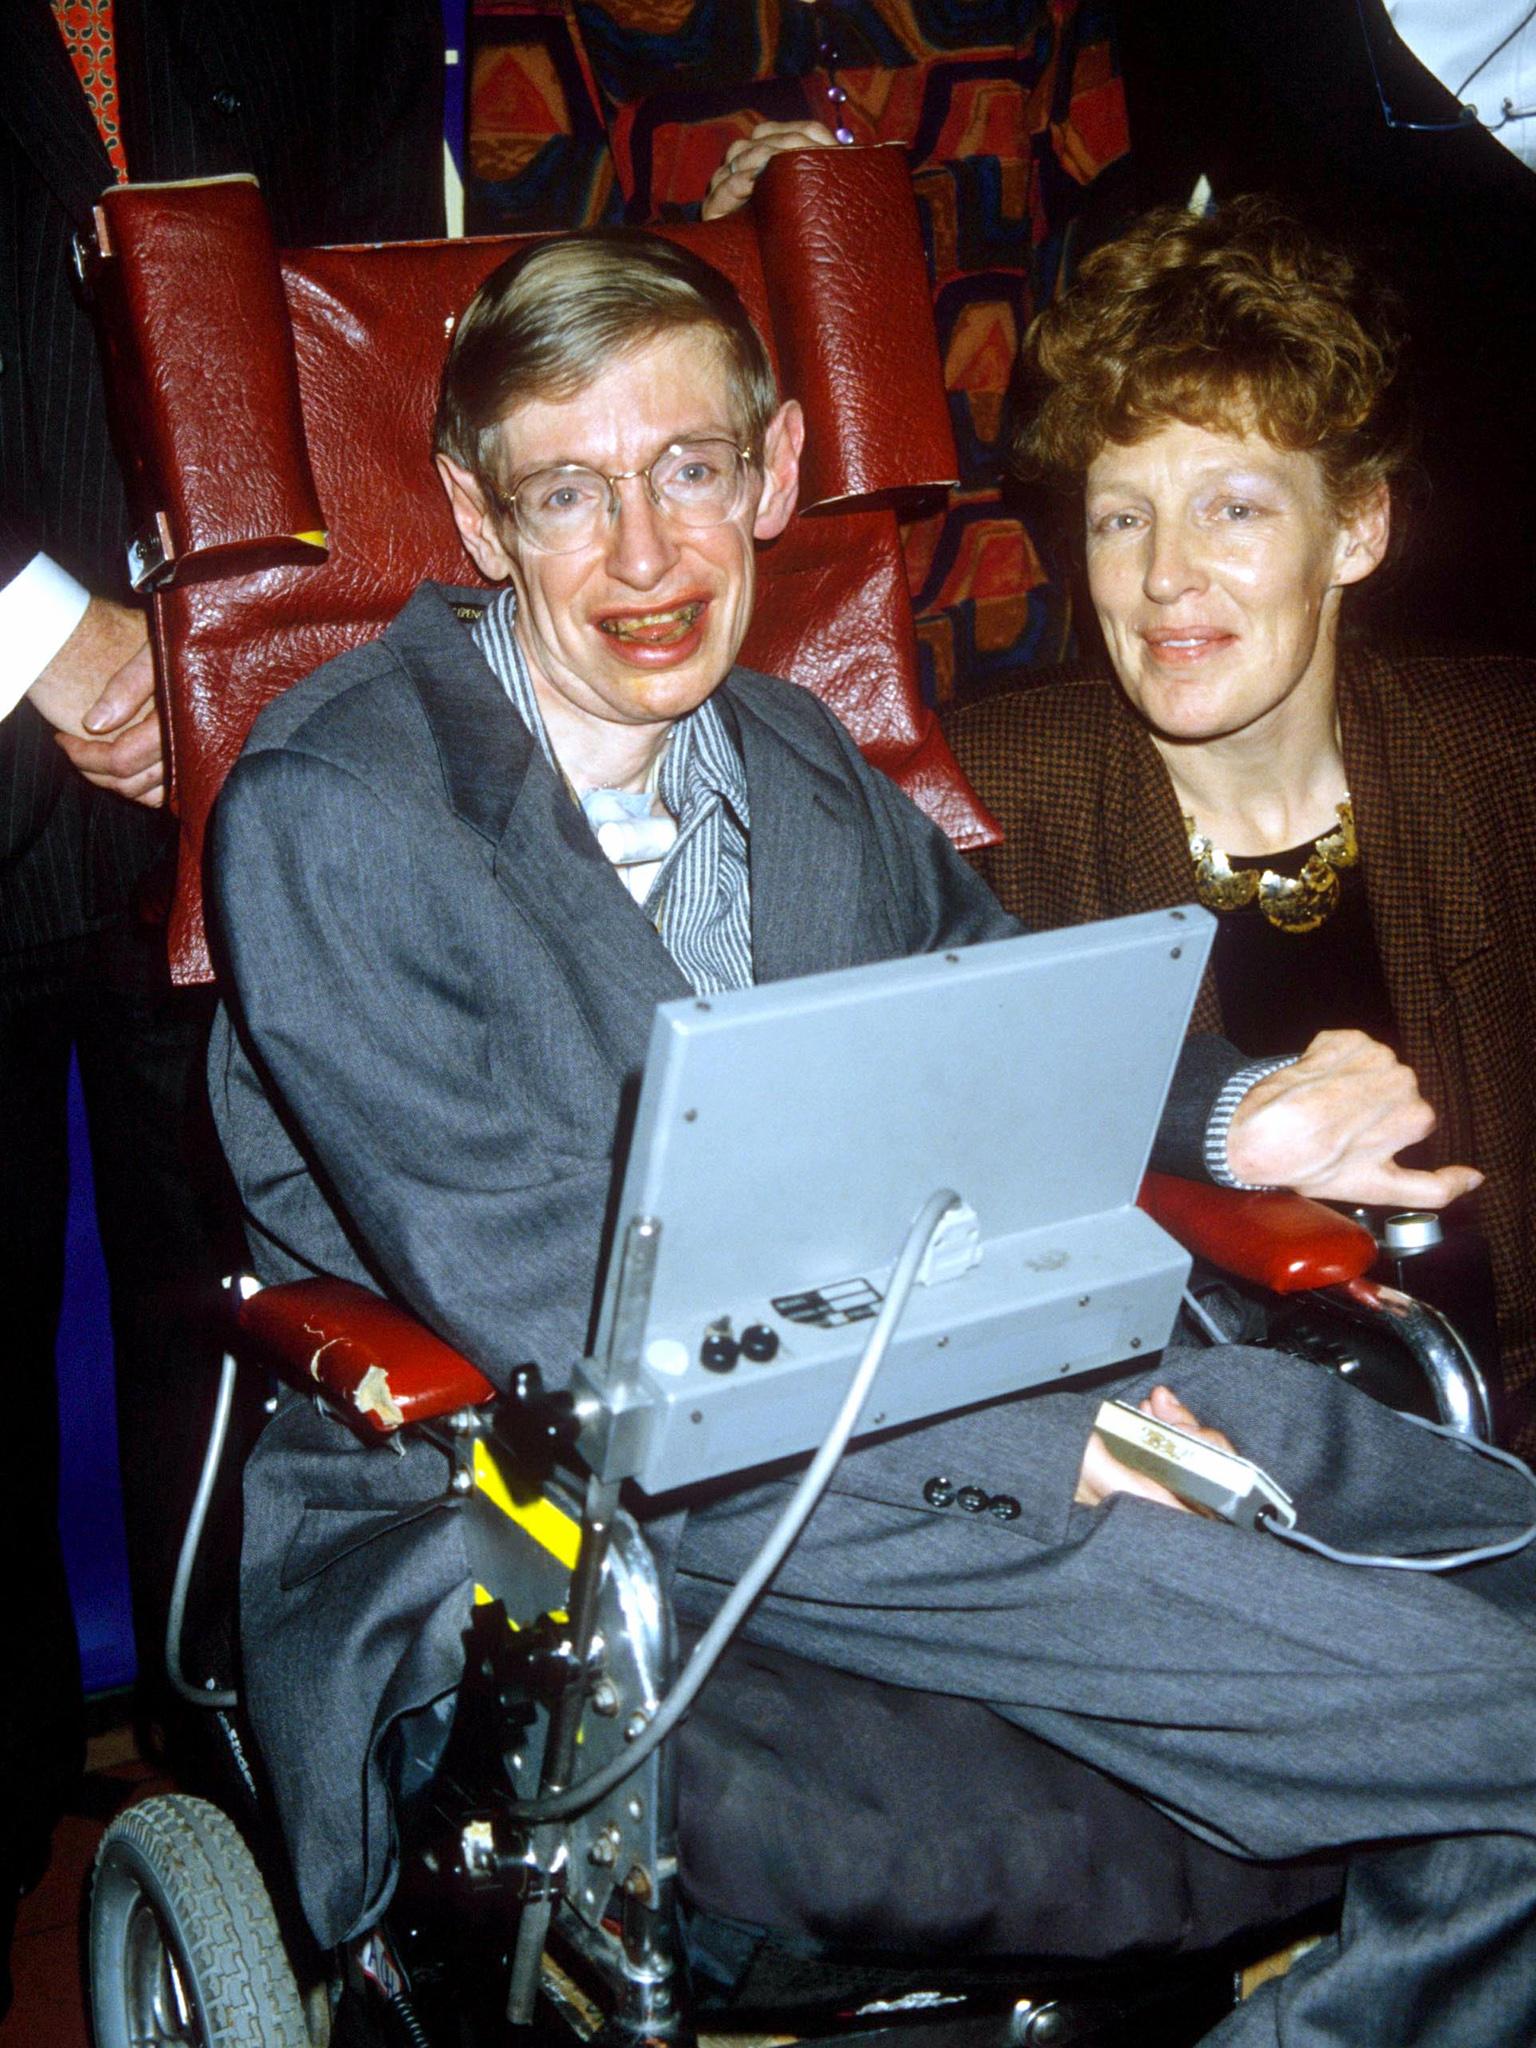 Hawking and his new bride Elaine Mason pose for pictures after their wedding in 1995.(Rex)